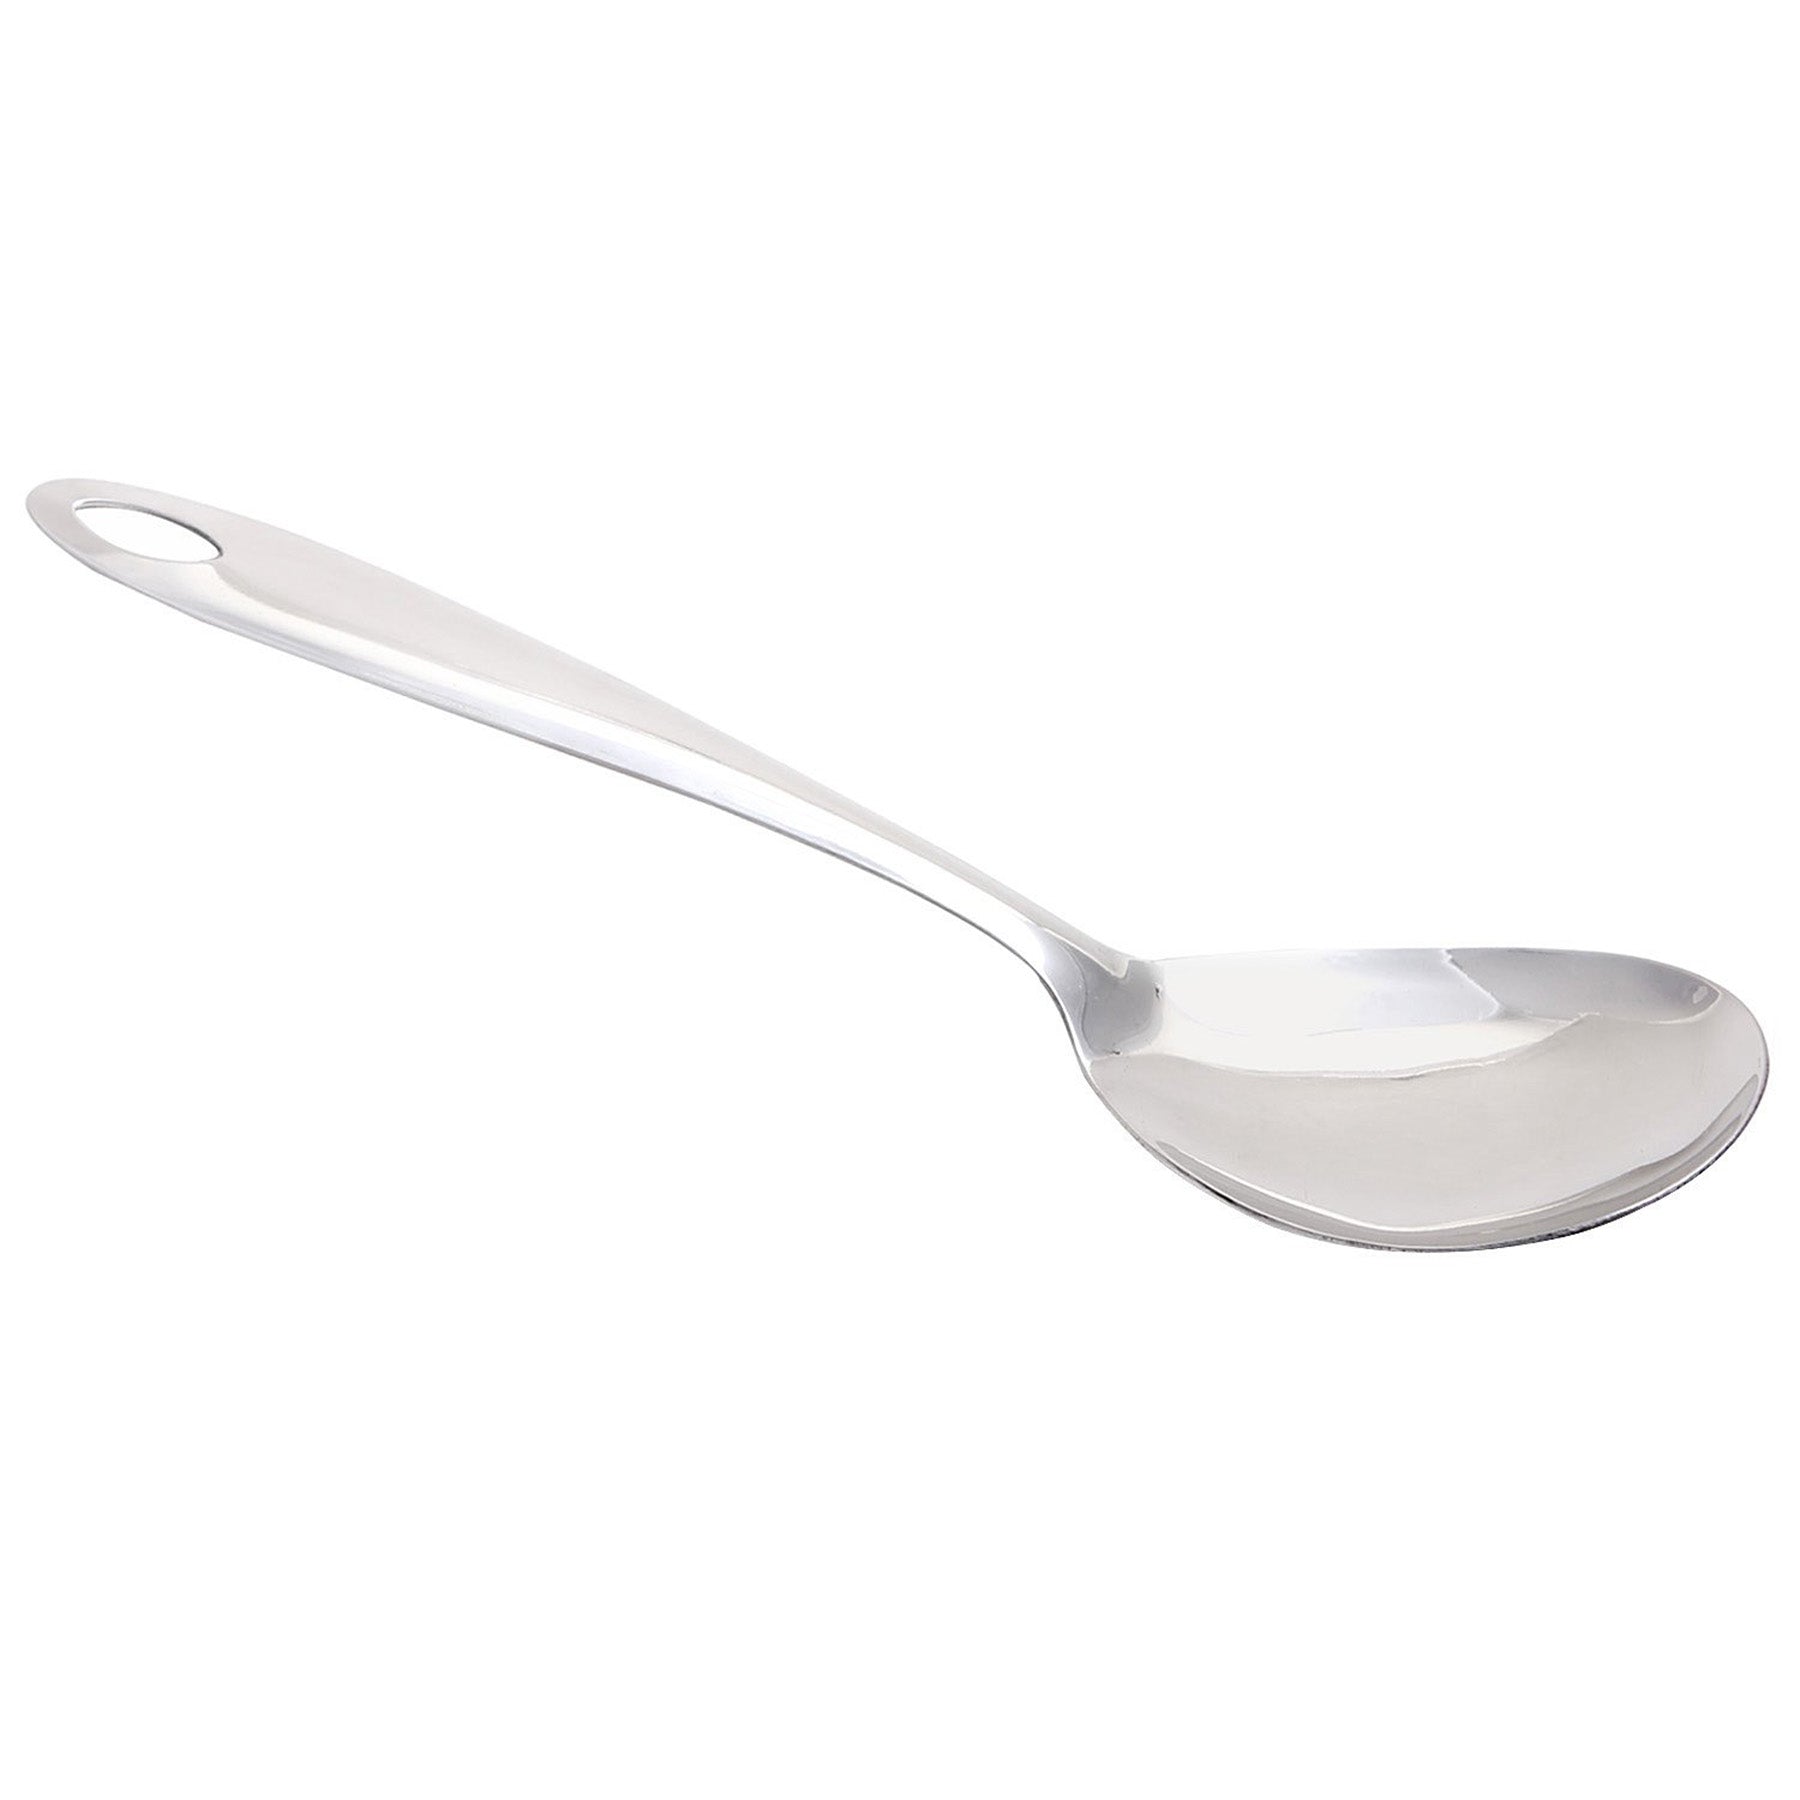 Oval Serving Spoon - Silver